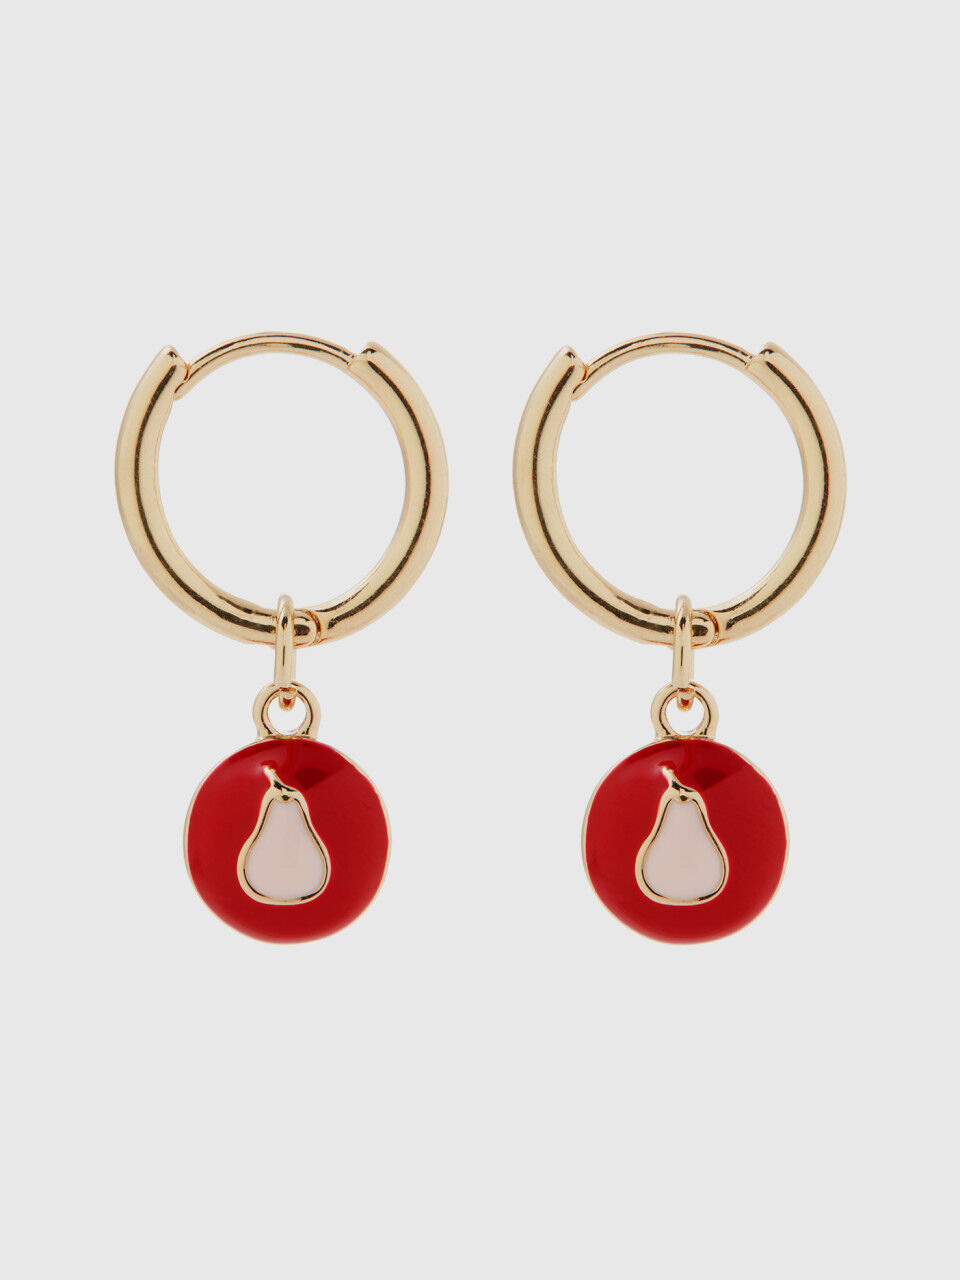 Earrings with red pear pendant